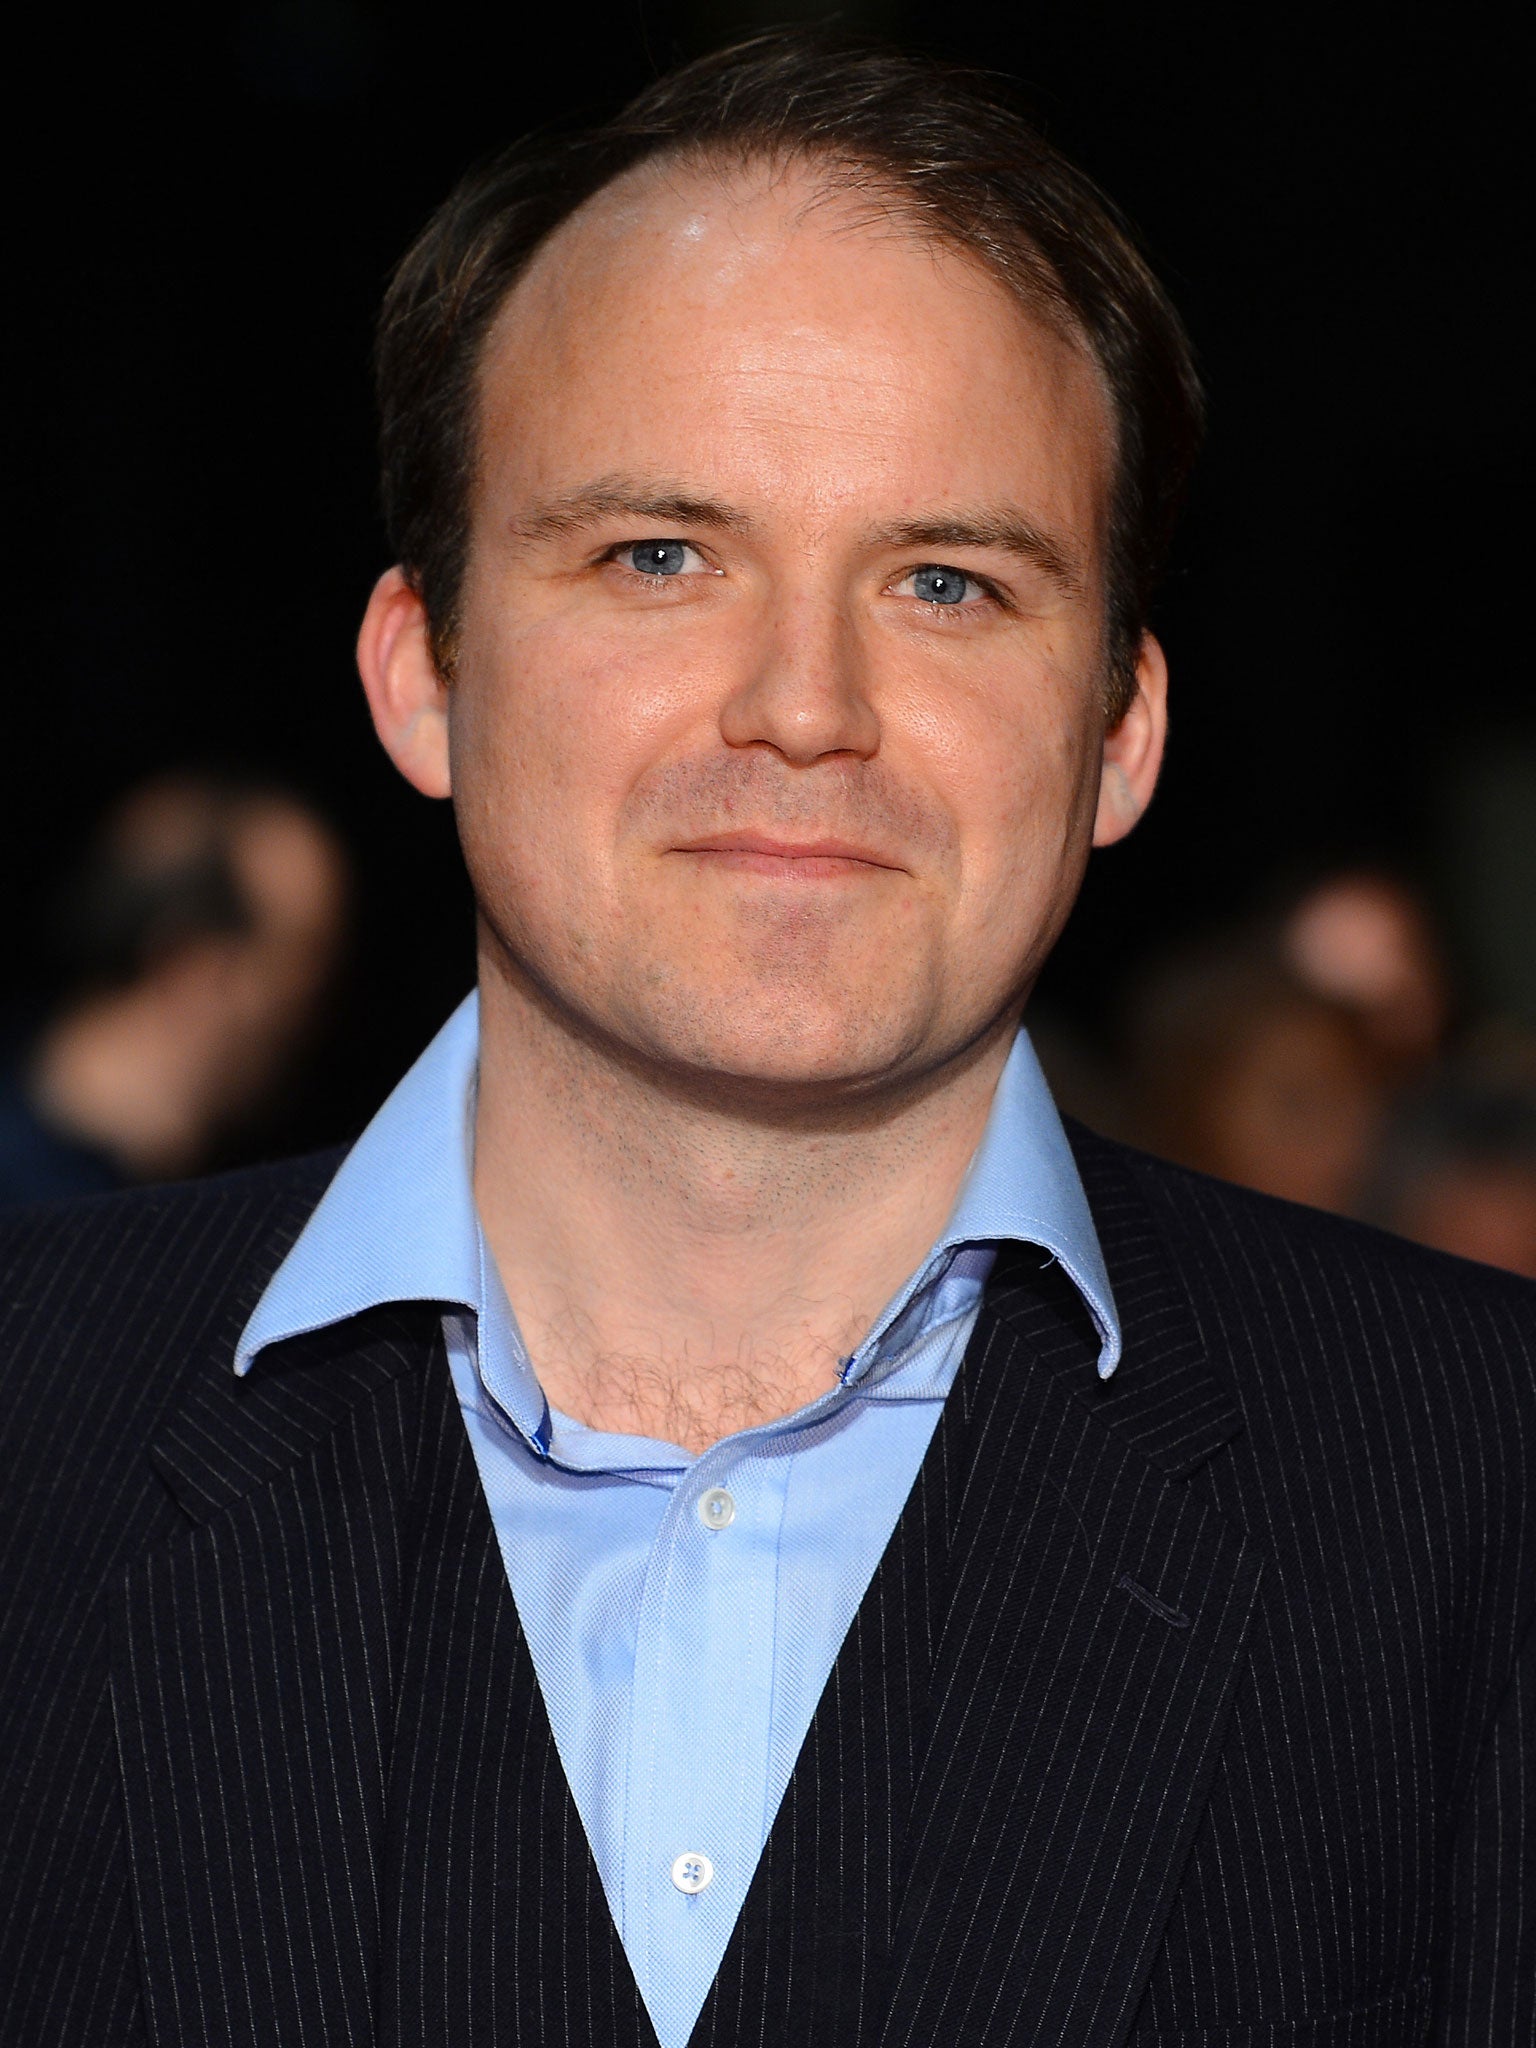 Betting on the identity of the next Doctor Who has been suspended by one bookmaker following reports the relatively unknown actor Rory Kinnear had been offered the role